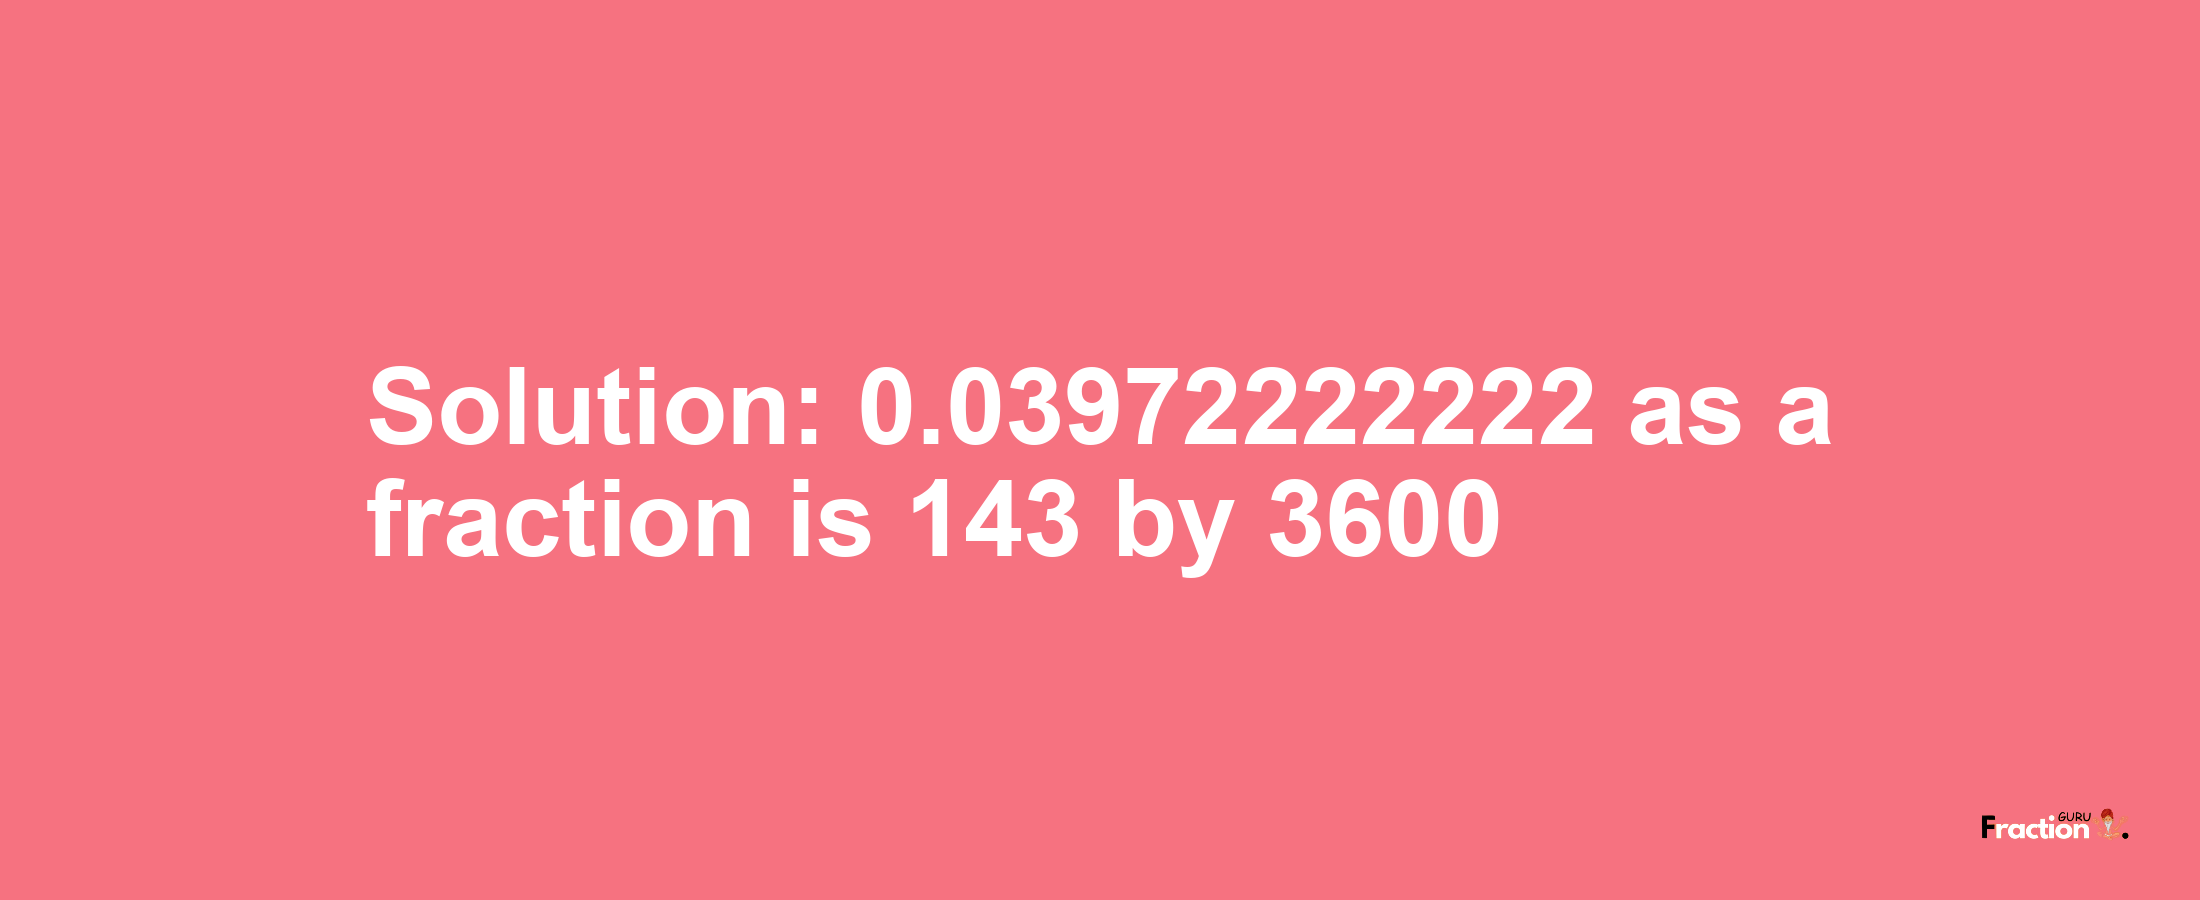 Solution:0.03972222222 as a fraction is 143/3600